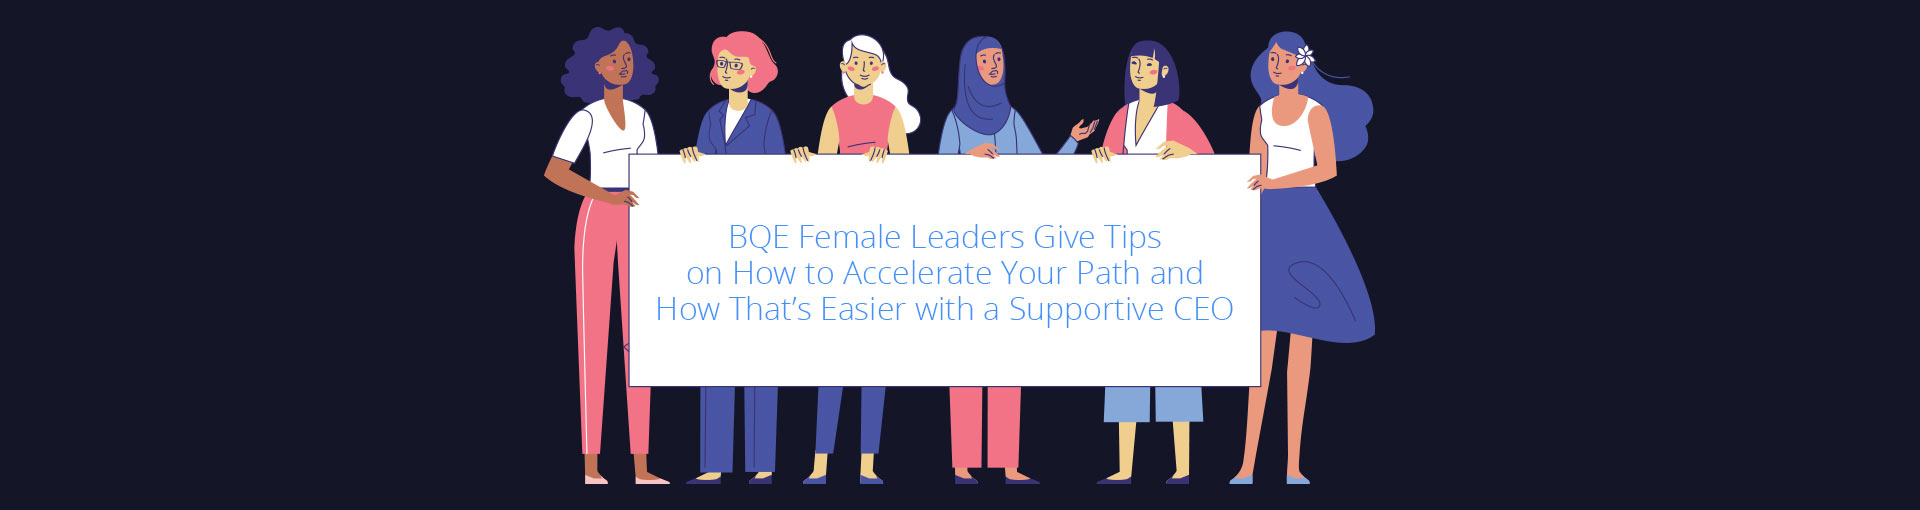 What Does it Take to Make it to the Top for Women? BQE Female Leaders Give Tips on How to Accelerate Your Path and How That’s Easier with a Supportive CEO Featured Image